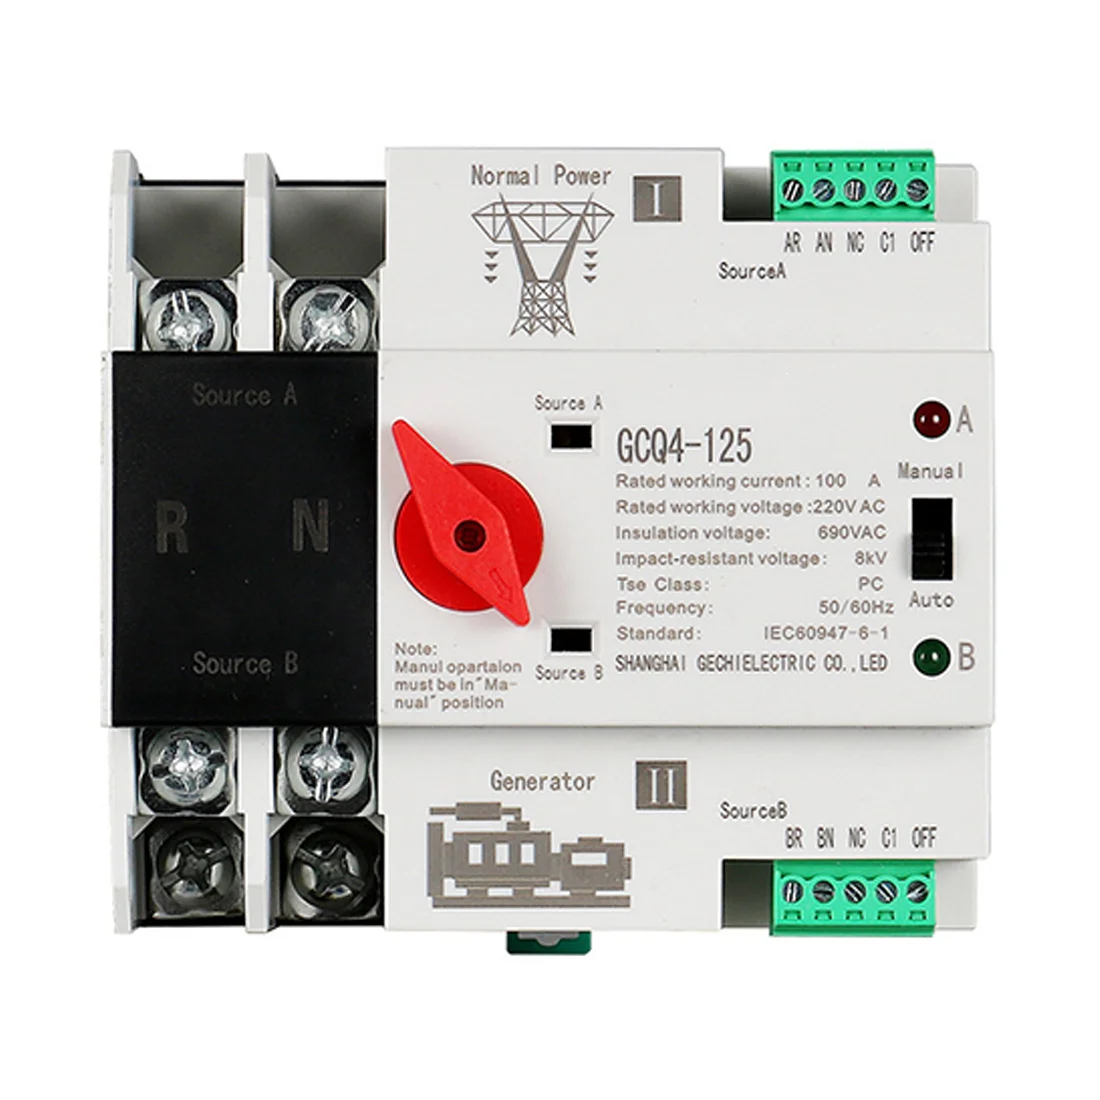 

Single Phase Din Rail ATS 220V PC Dual Power Automatic Transfer Switch 2P 100A Household Power Transfer Switch 50/60Hz